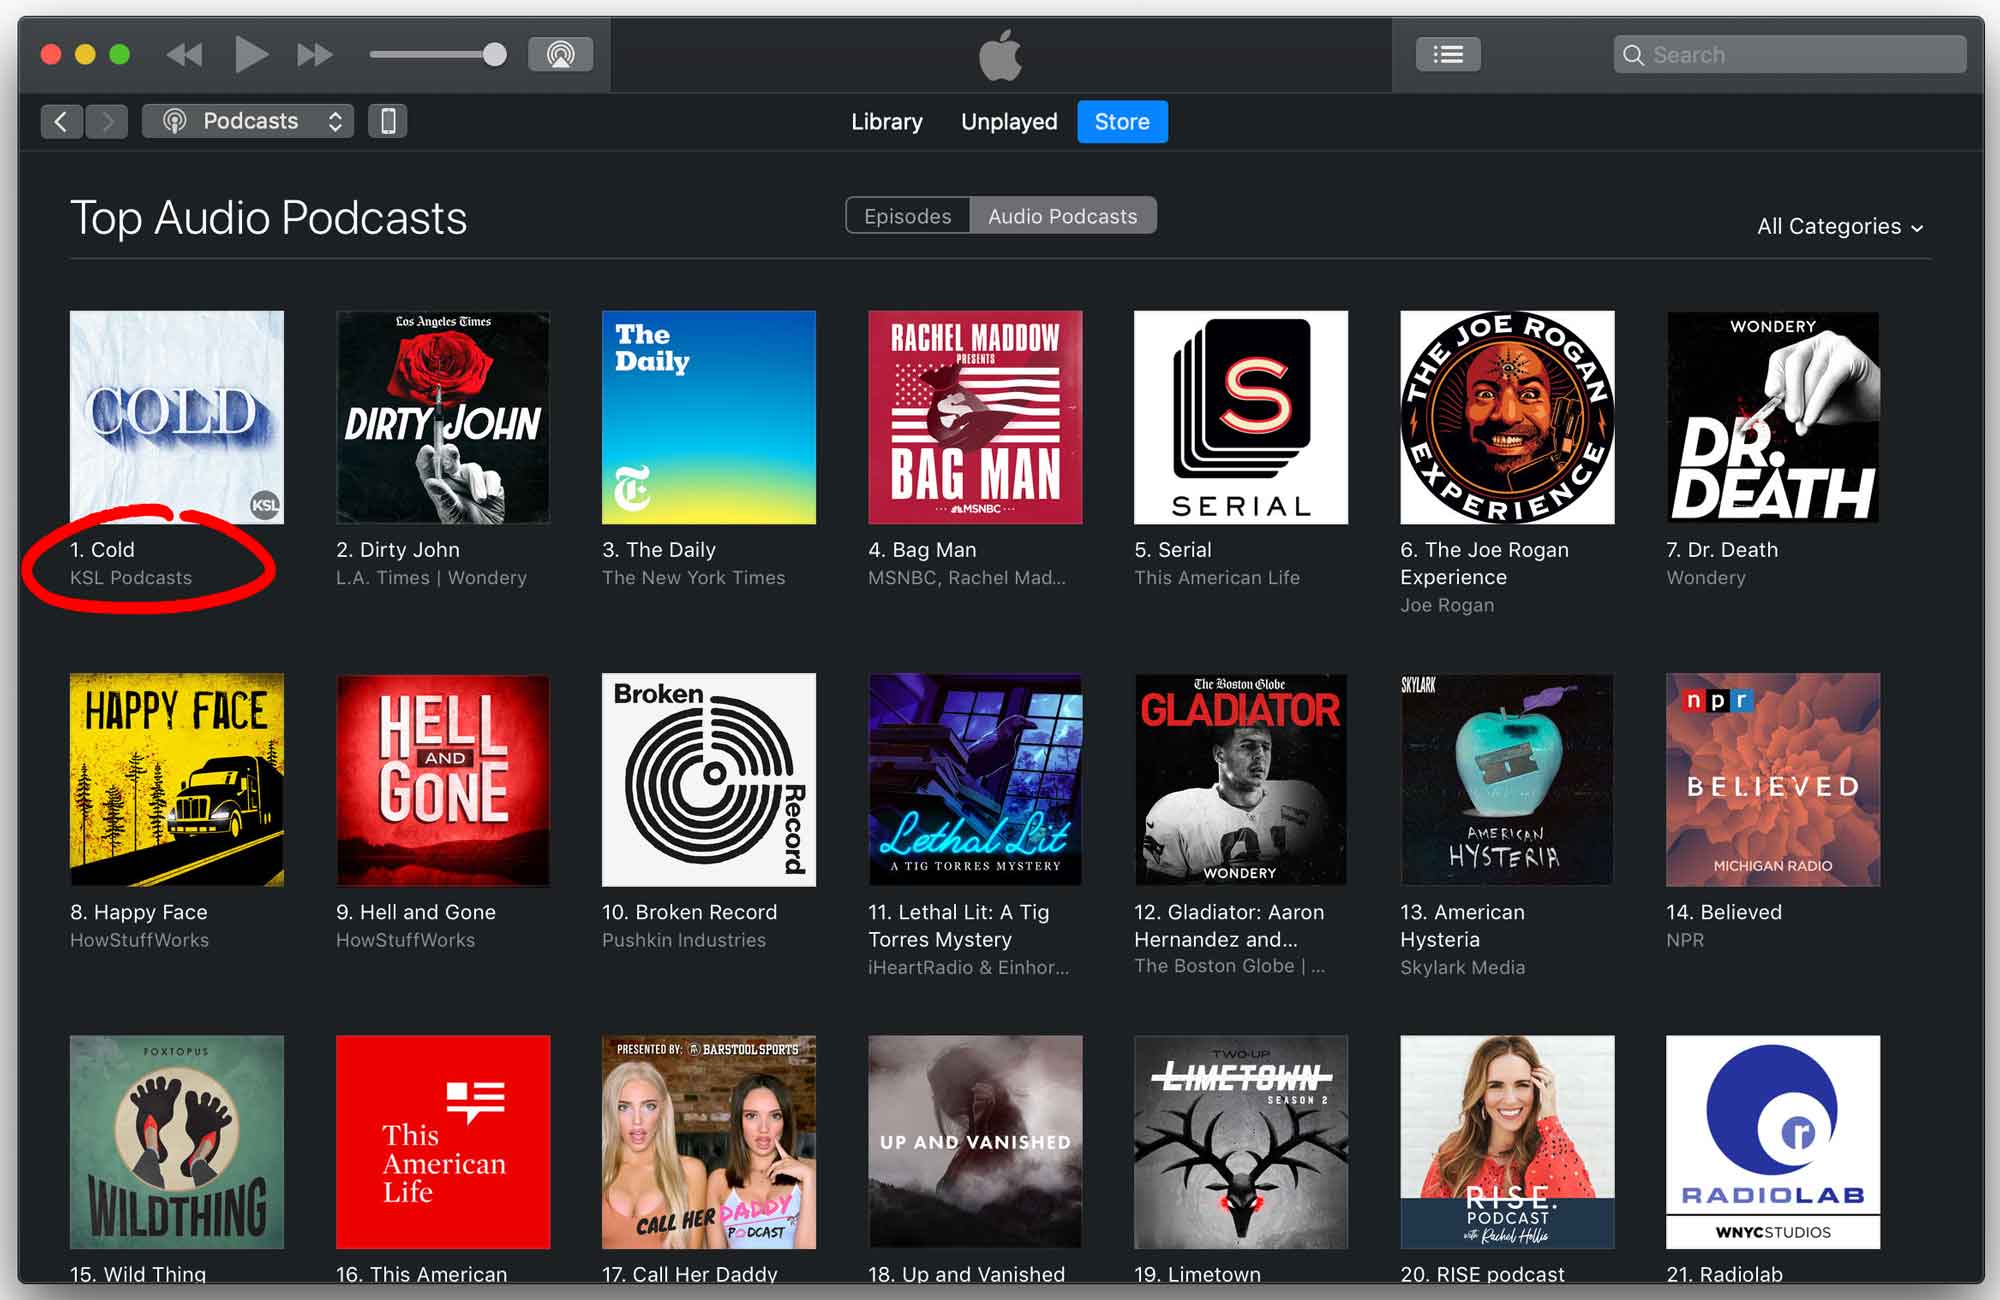 Cold Podcast: #1 Podcast In Itunes